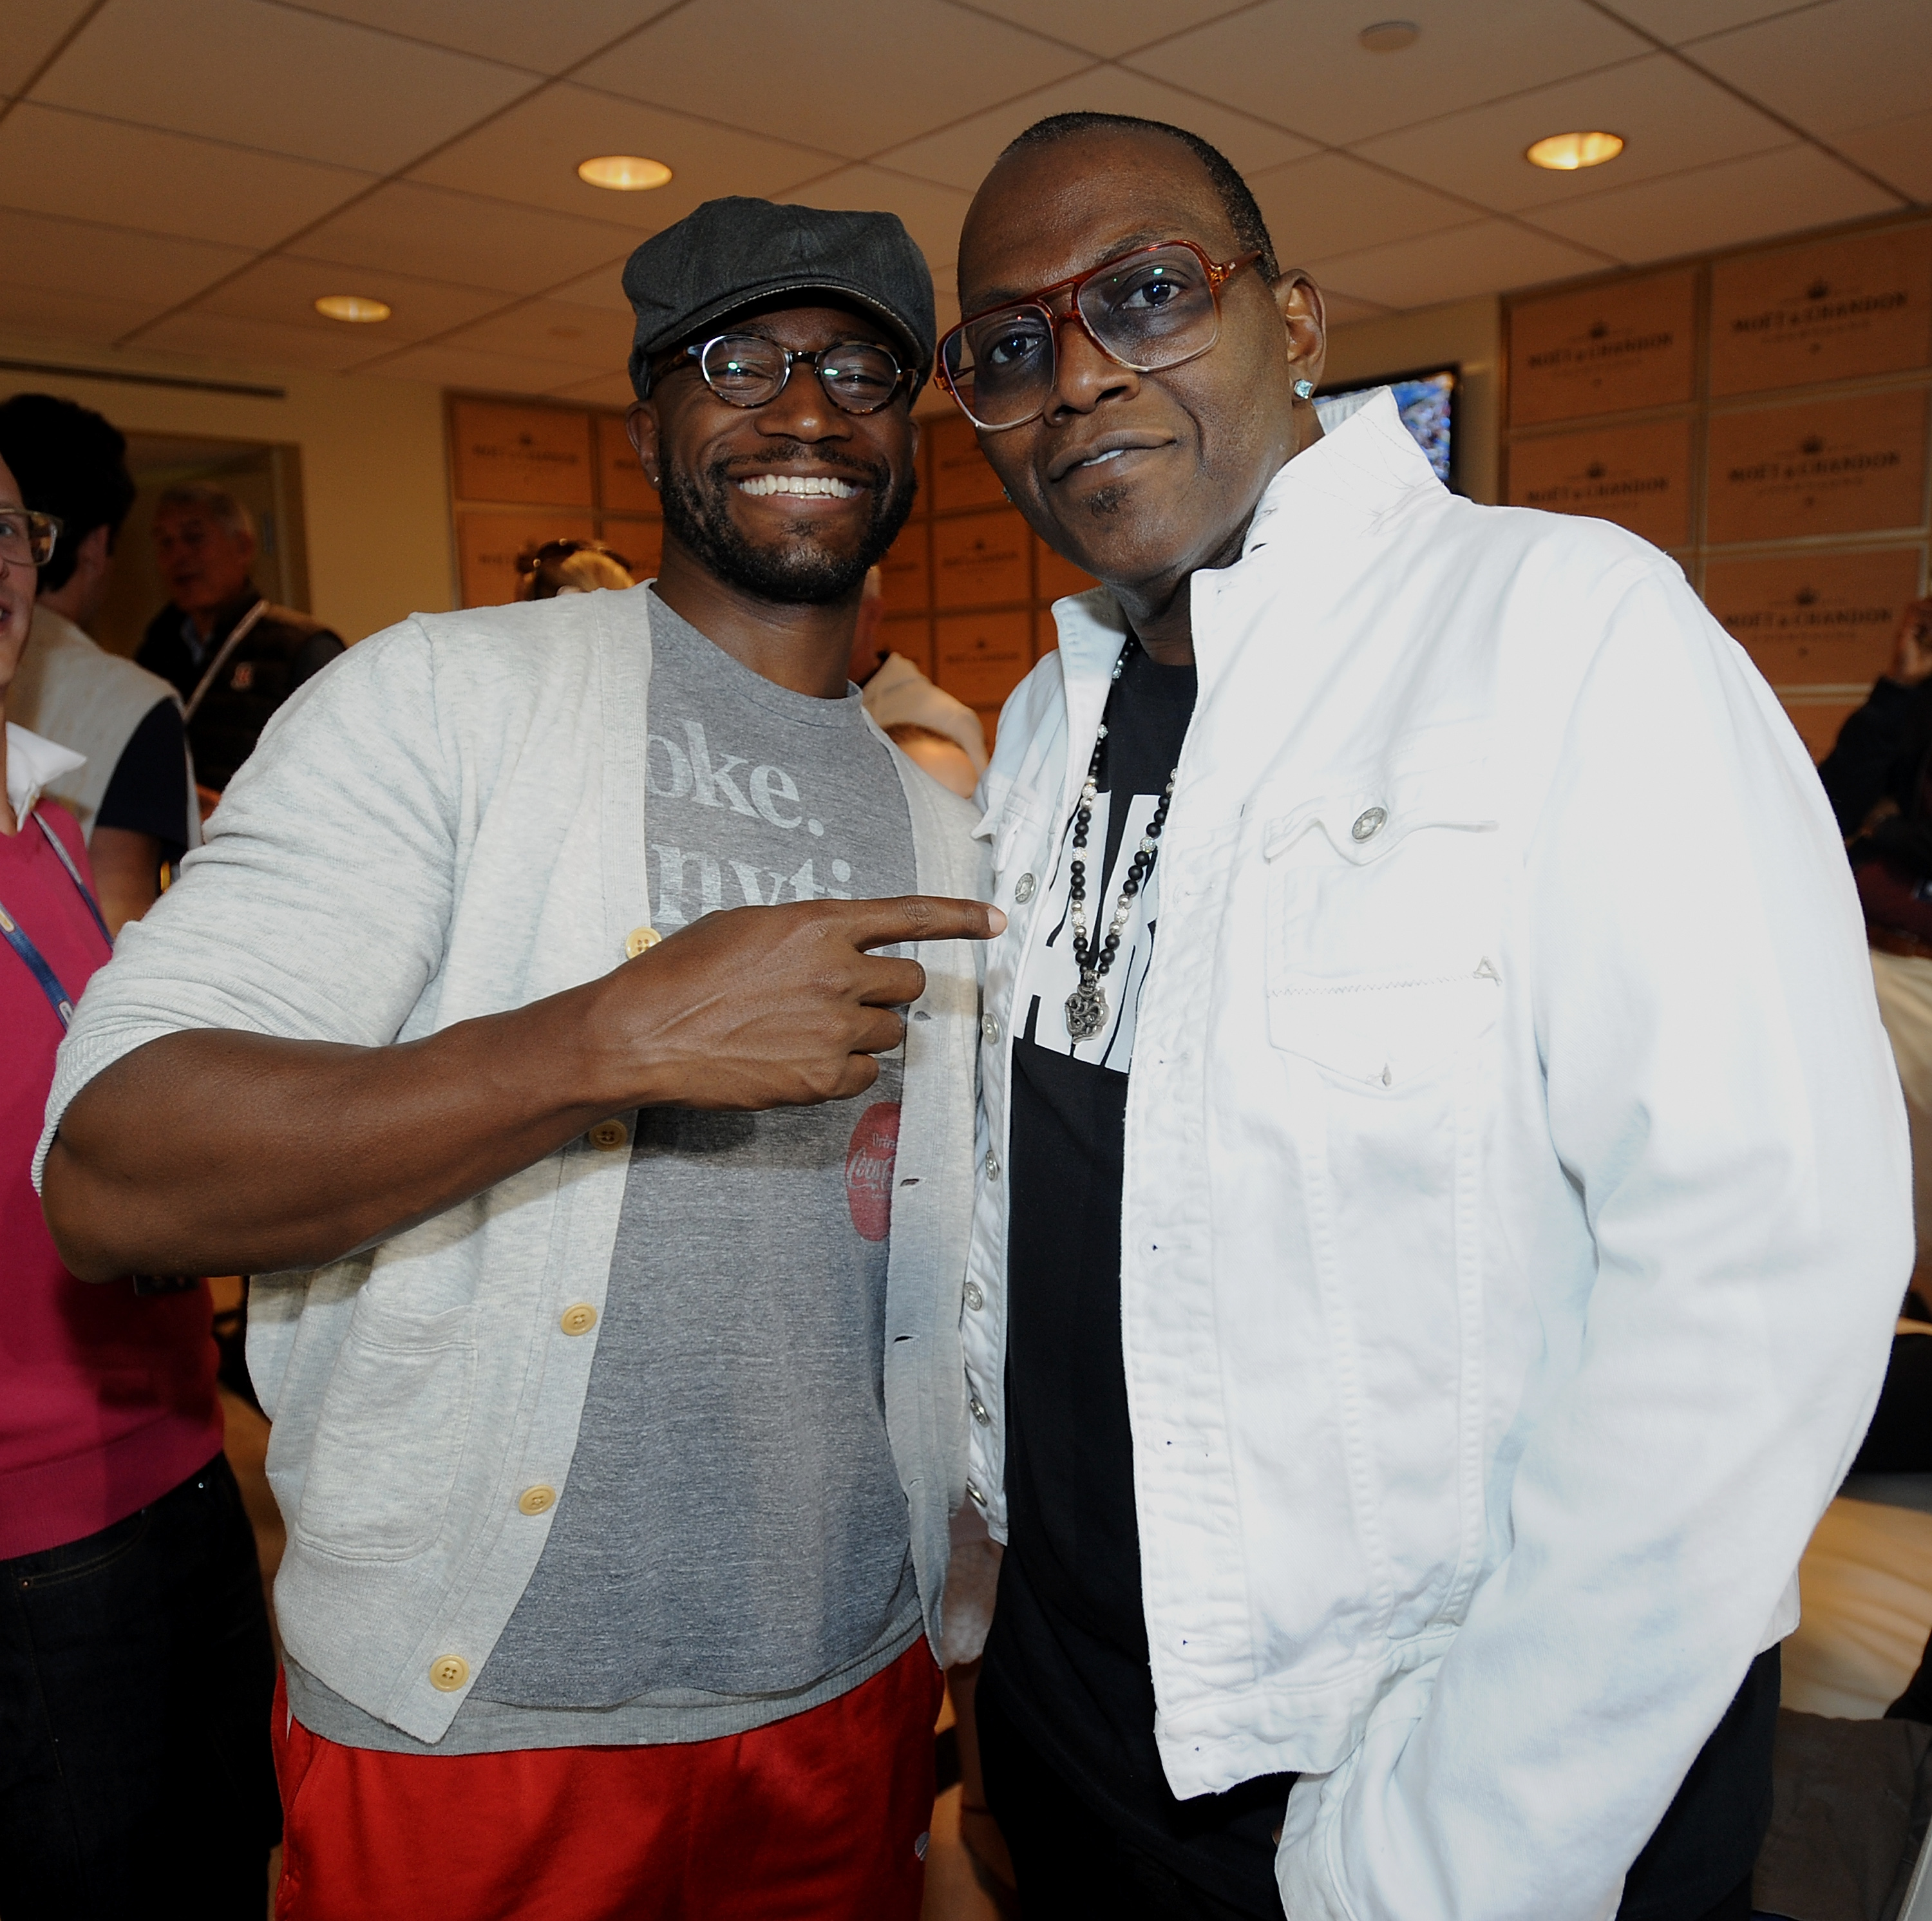 Taye Diggs(L) and  Randy Jackson attend The Moet & Chandon Suite at USTA Billie Jean King National Tennis Center on September 9, 2013 in New York City.  (Photo by Brad Barket/Getty Images for Moet & Chandon)